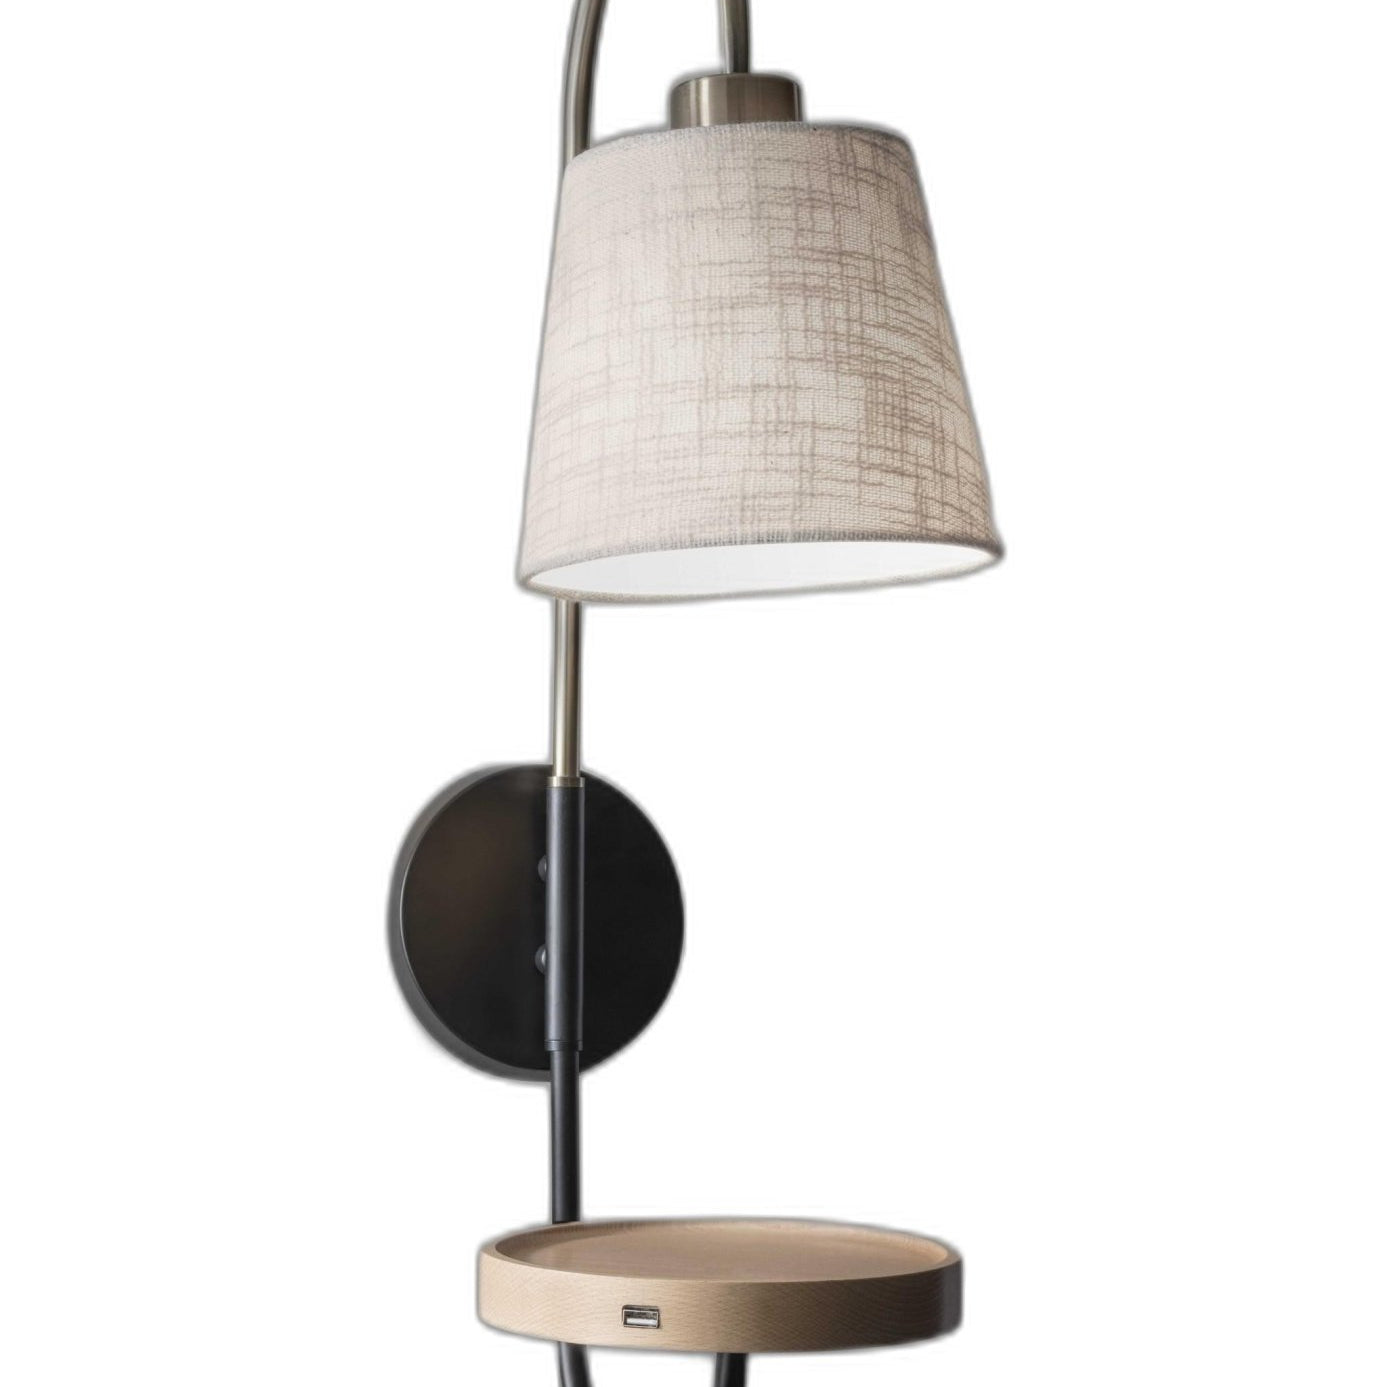 Antique Brass And Black Metal Wall Lamp With Usb Charging Station Wood Shelf - Tuesday Morning-Wall Lighting